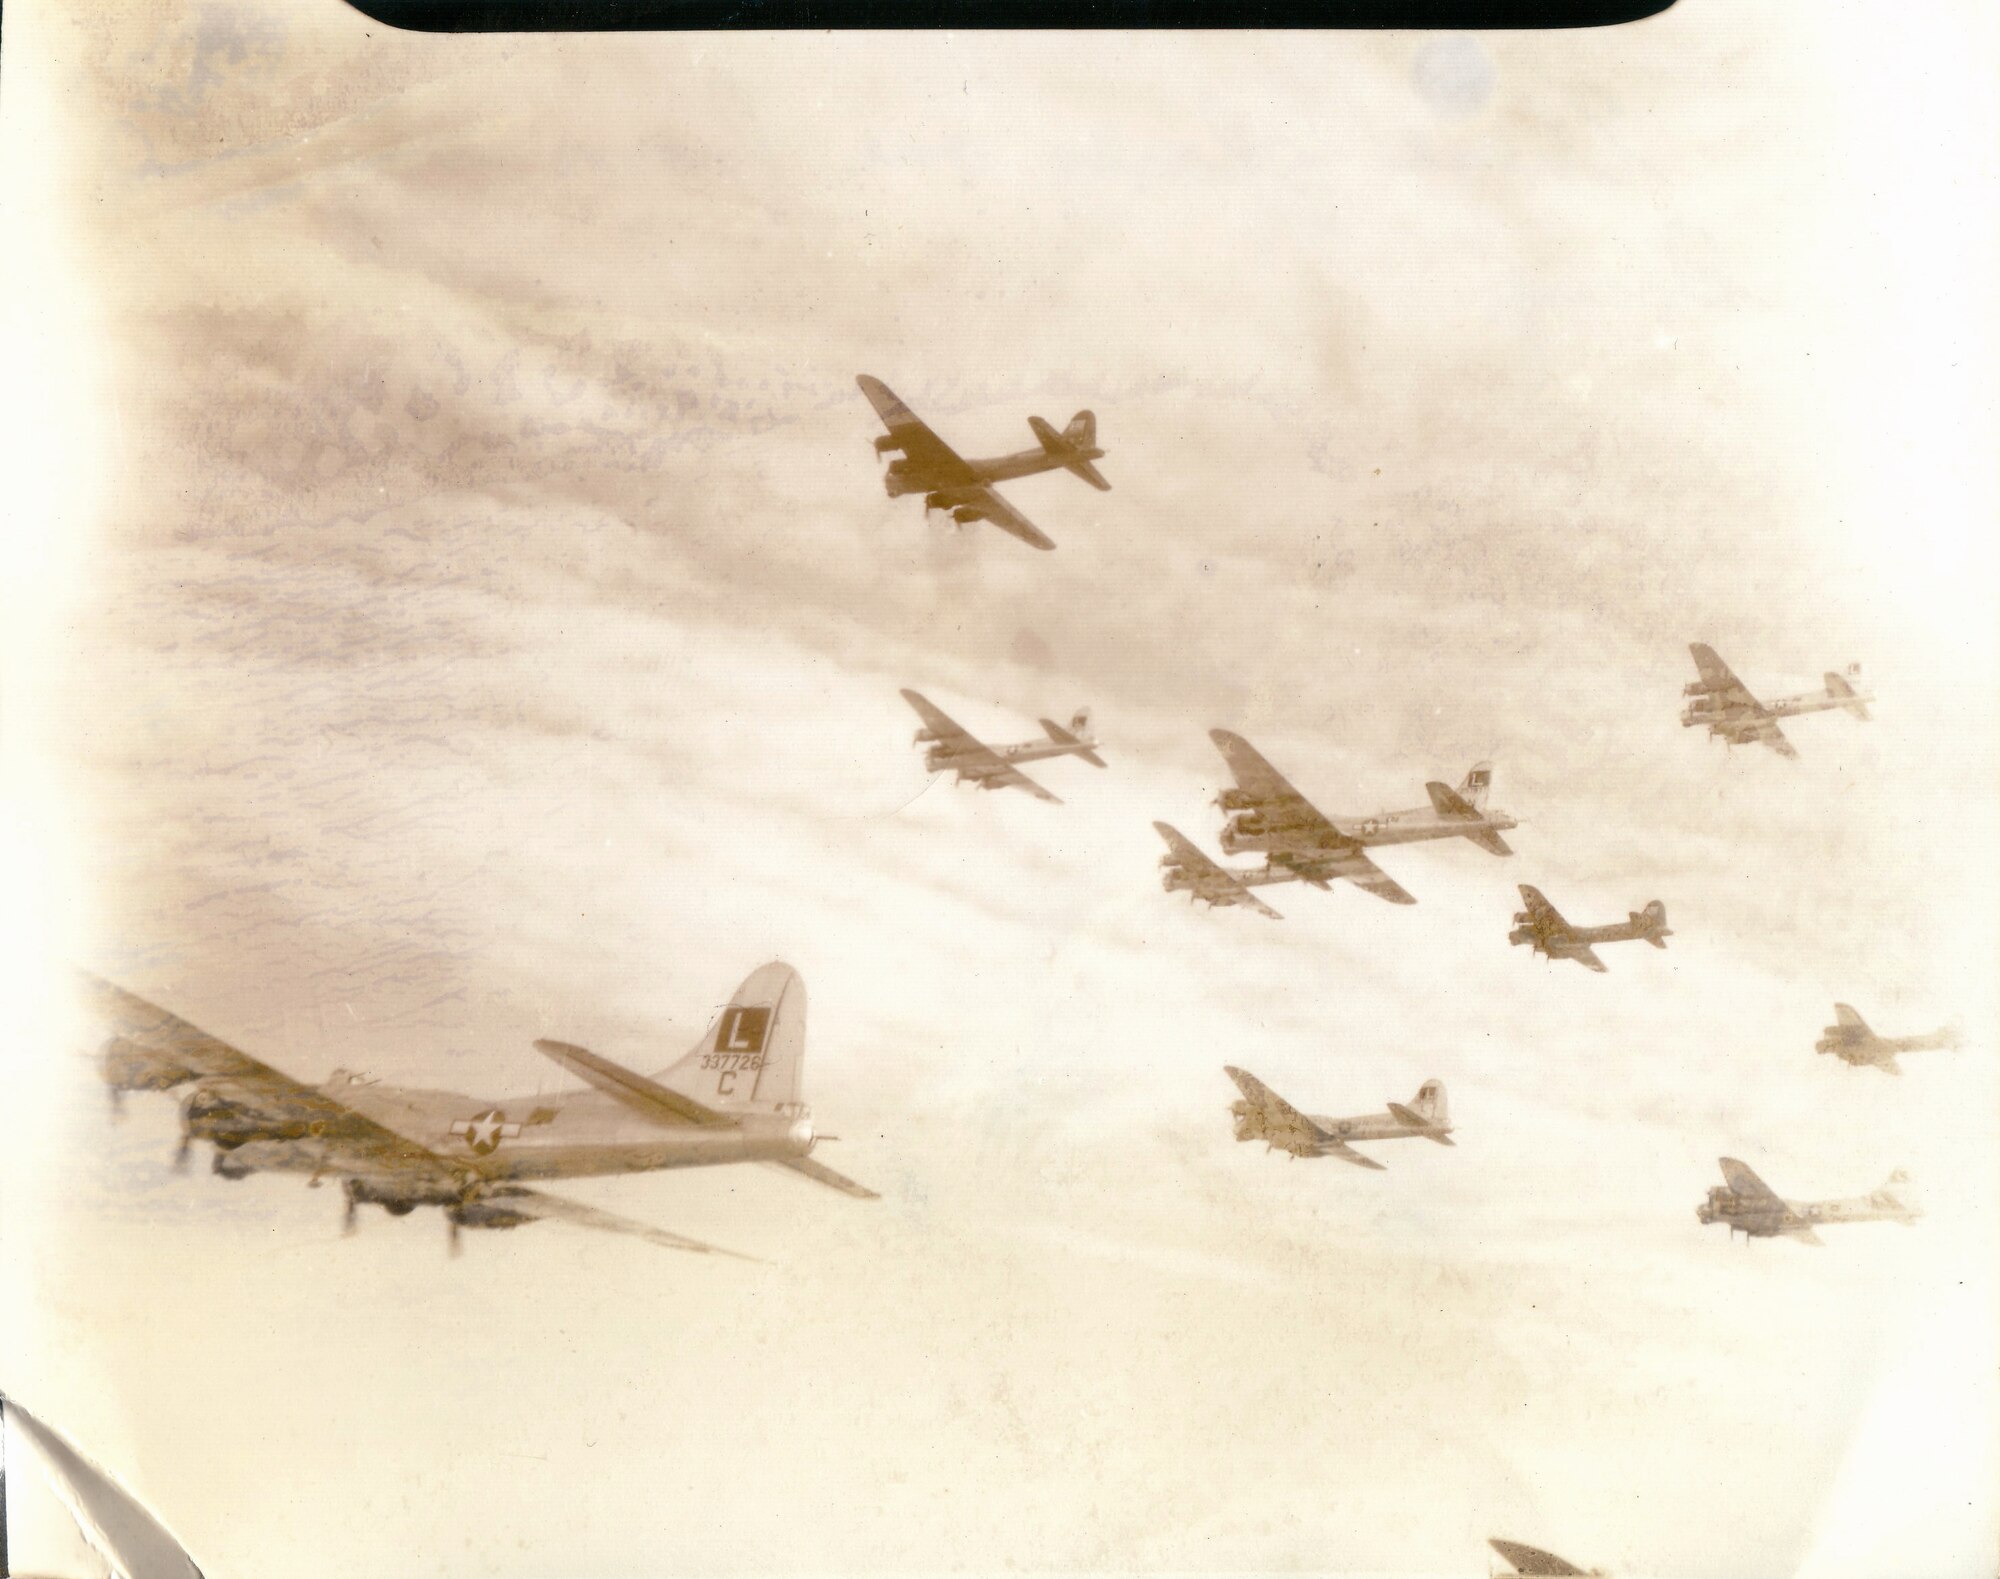 The B17 flying in the foreground is part of the 452nd Bombardment Group. Seen here flying with other aircraft, the 452nd planes were identified by the boxed L on their tail. (U.S. Army Air Forces photo)